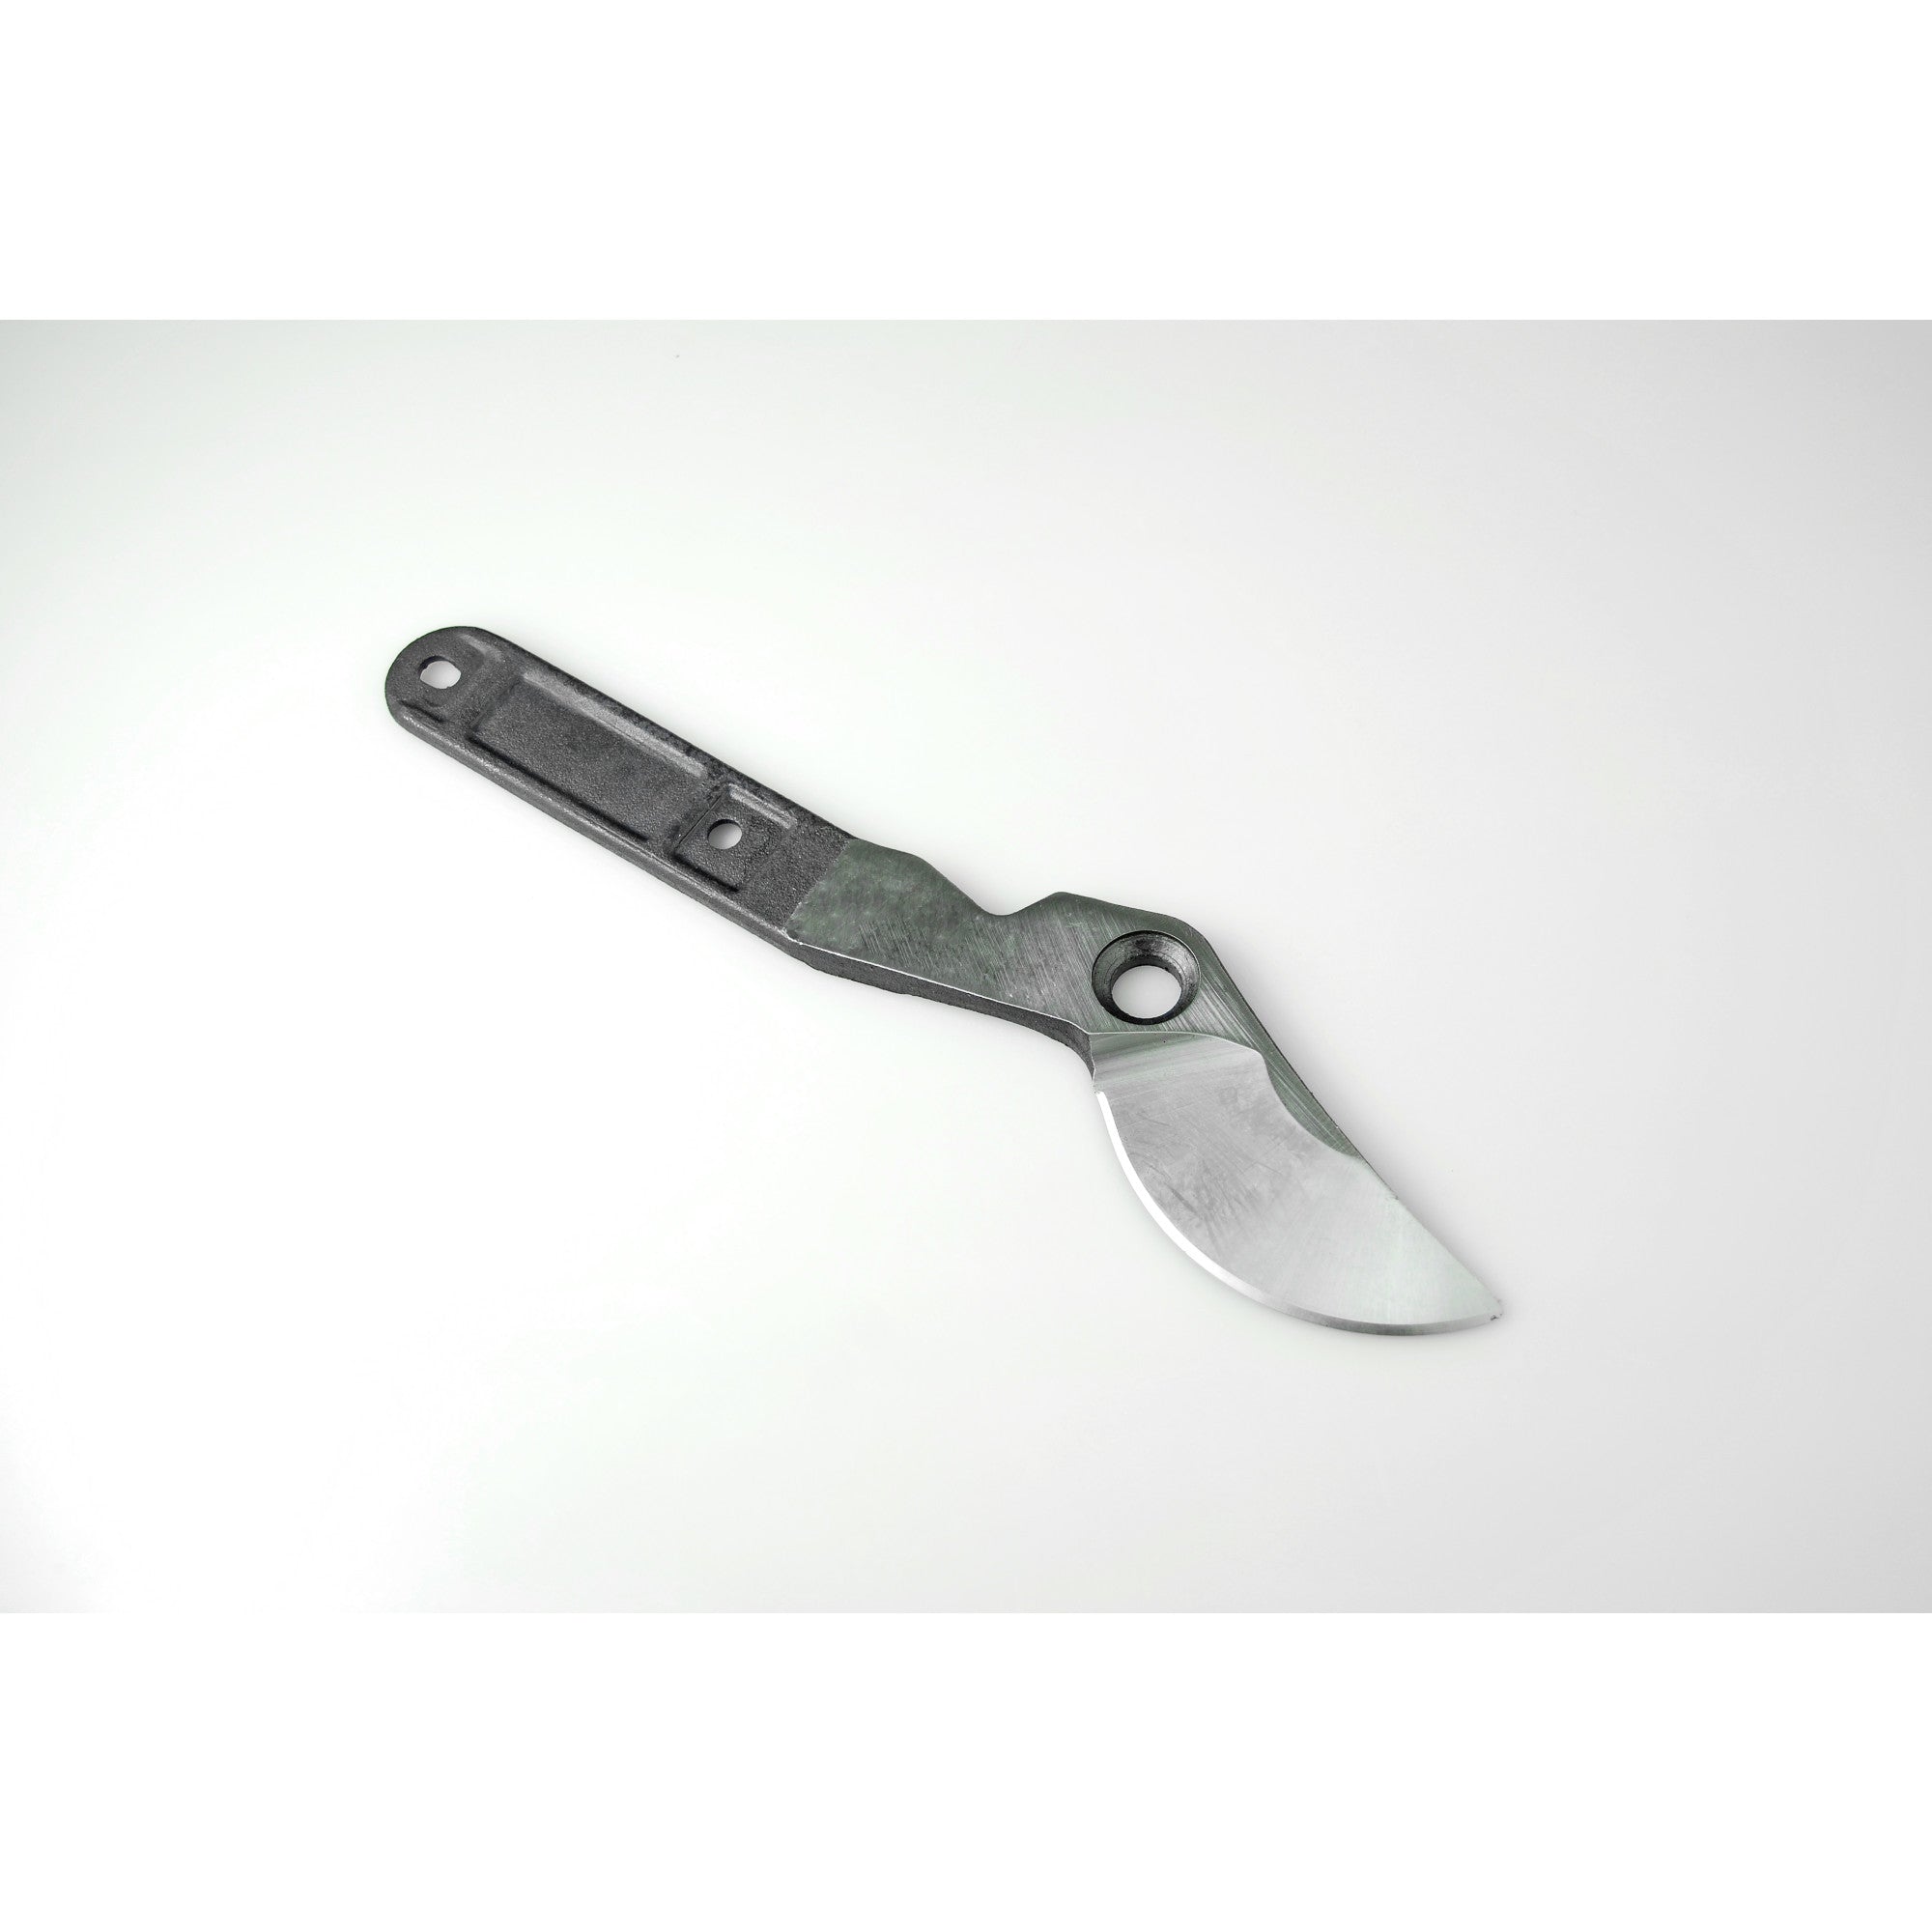 Replacement Blade for Bypass Pruners